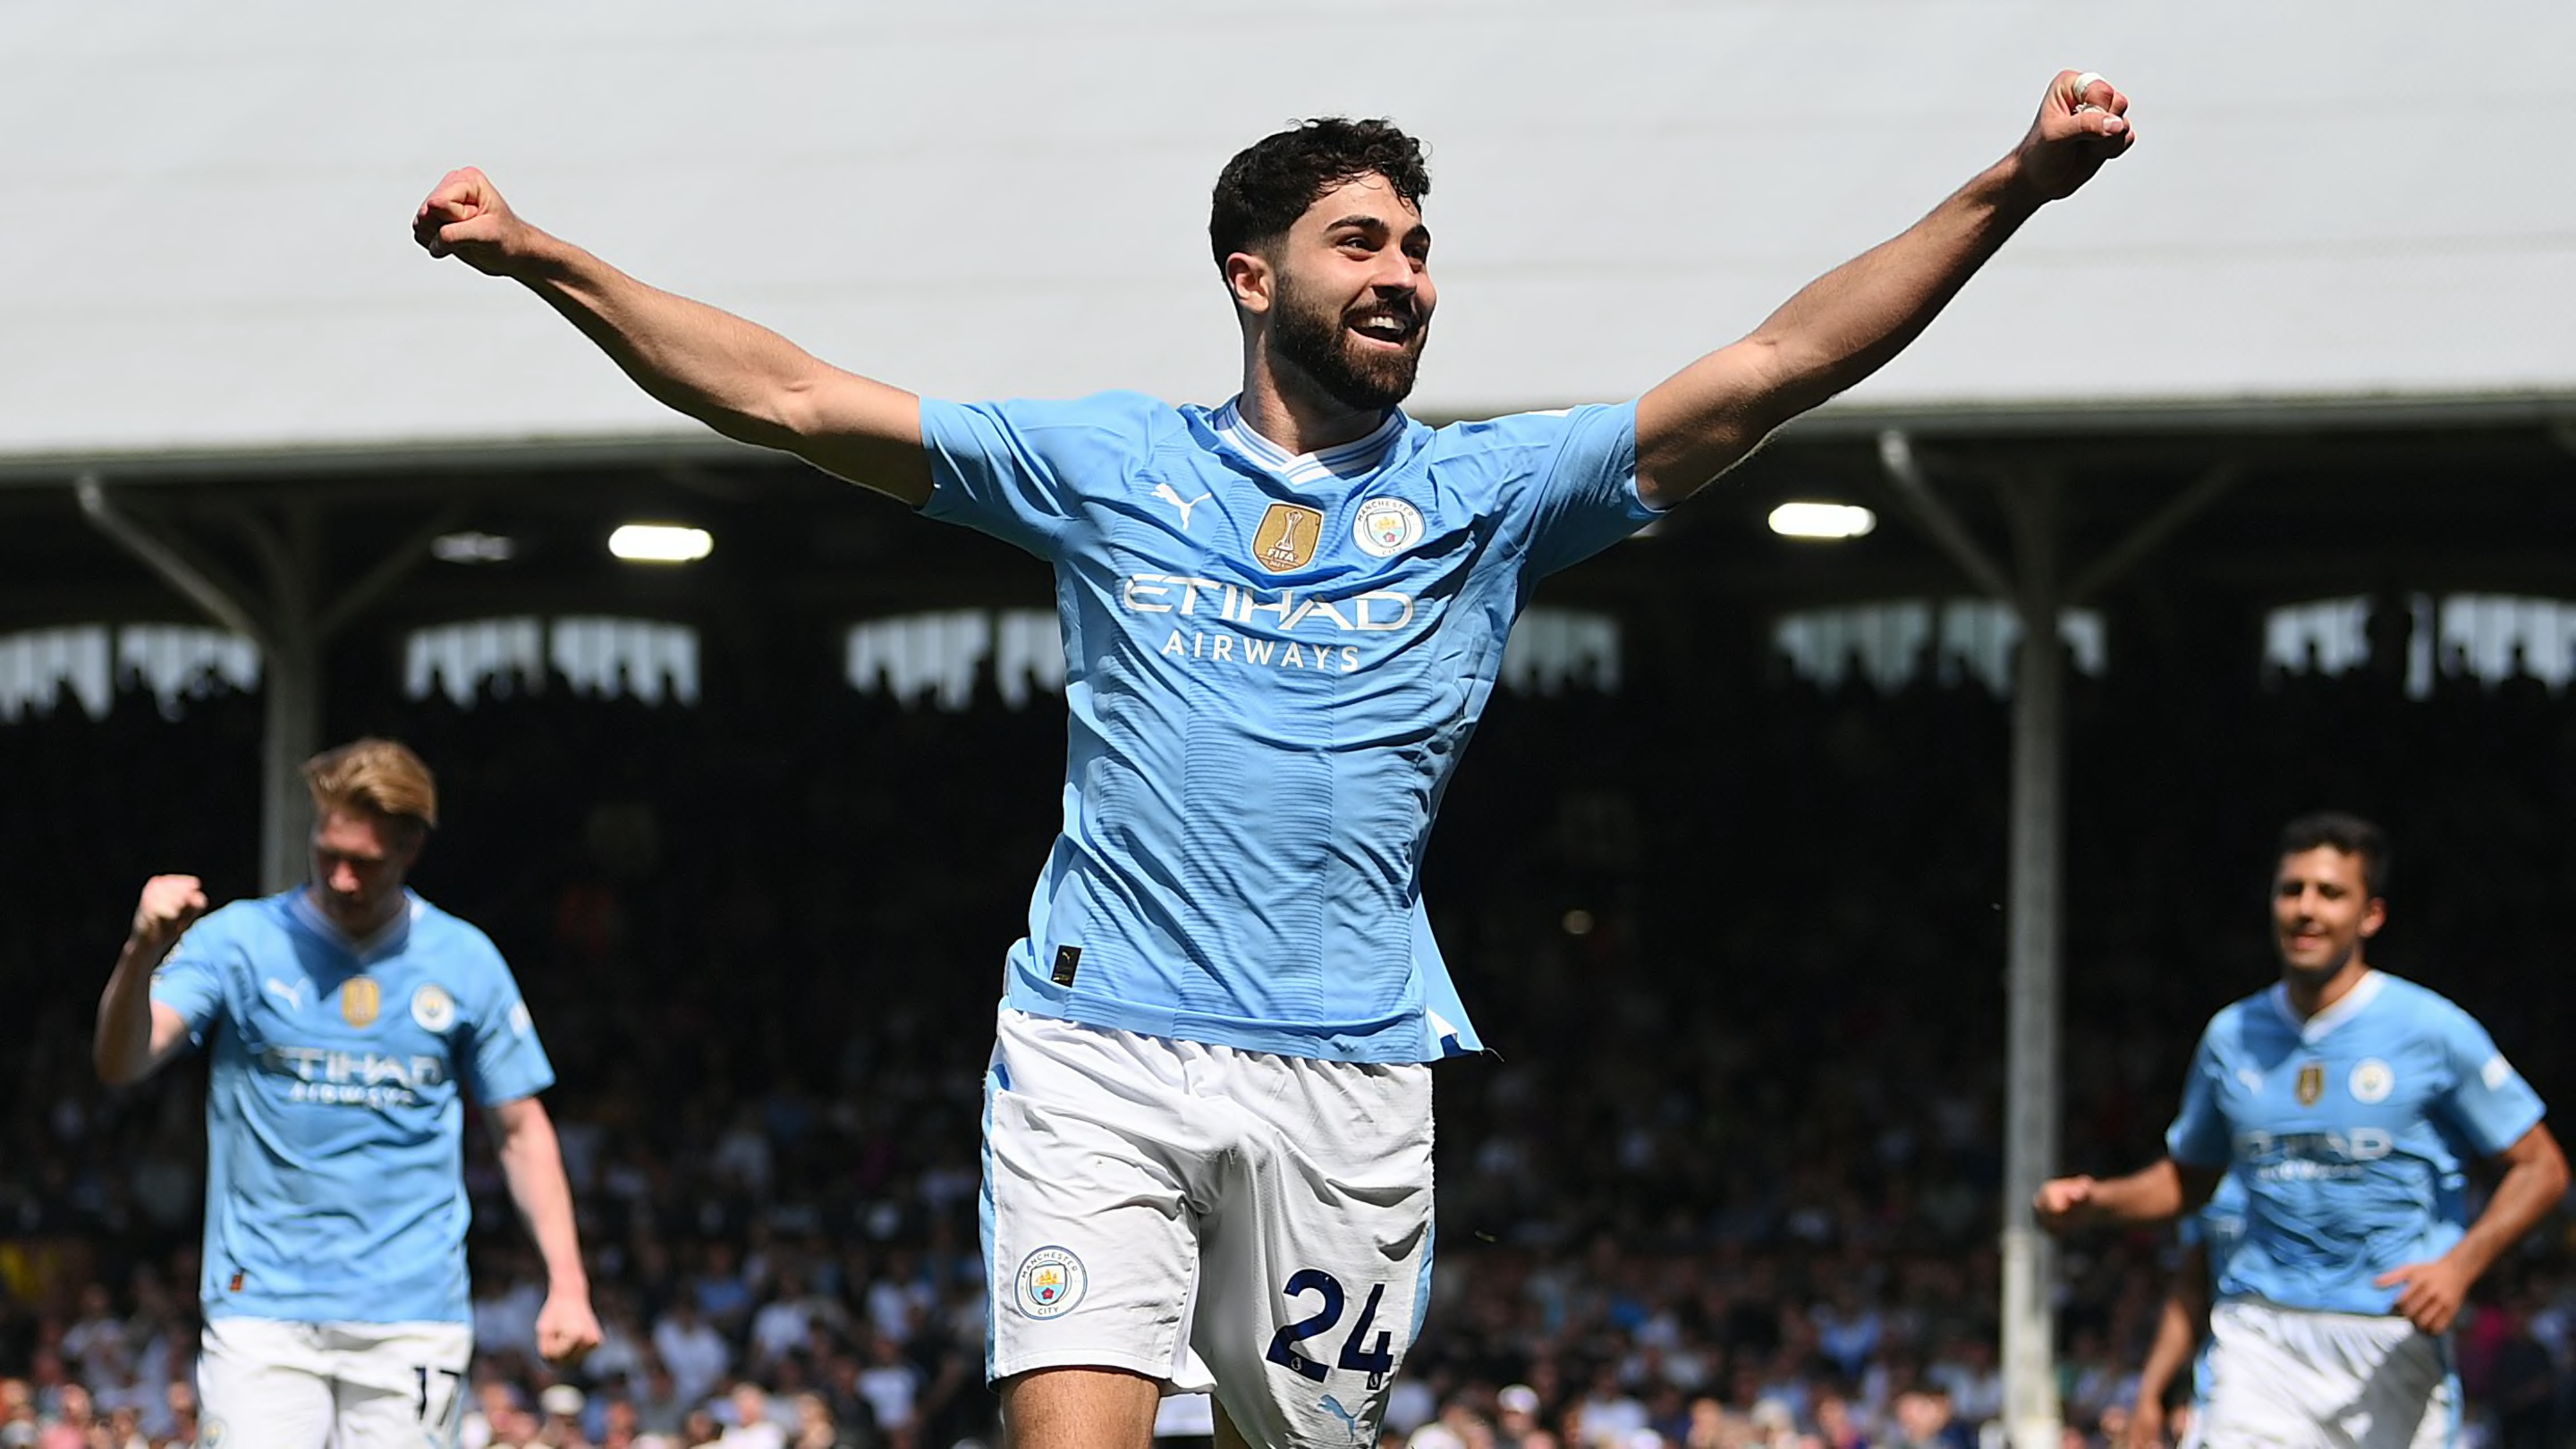 Fulham 0-4 Man City: Player ratings as Cityzens close in on Premier League title